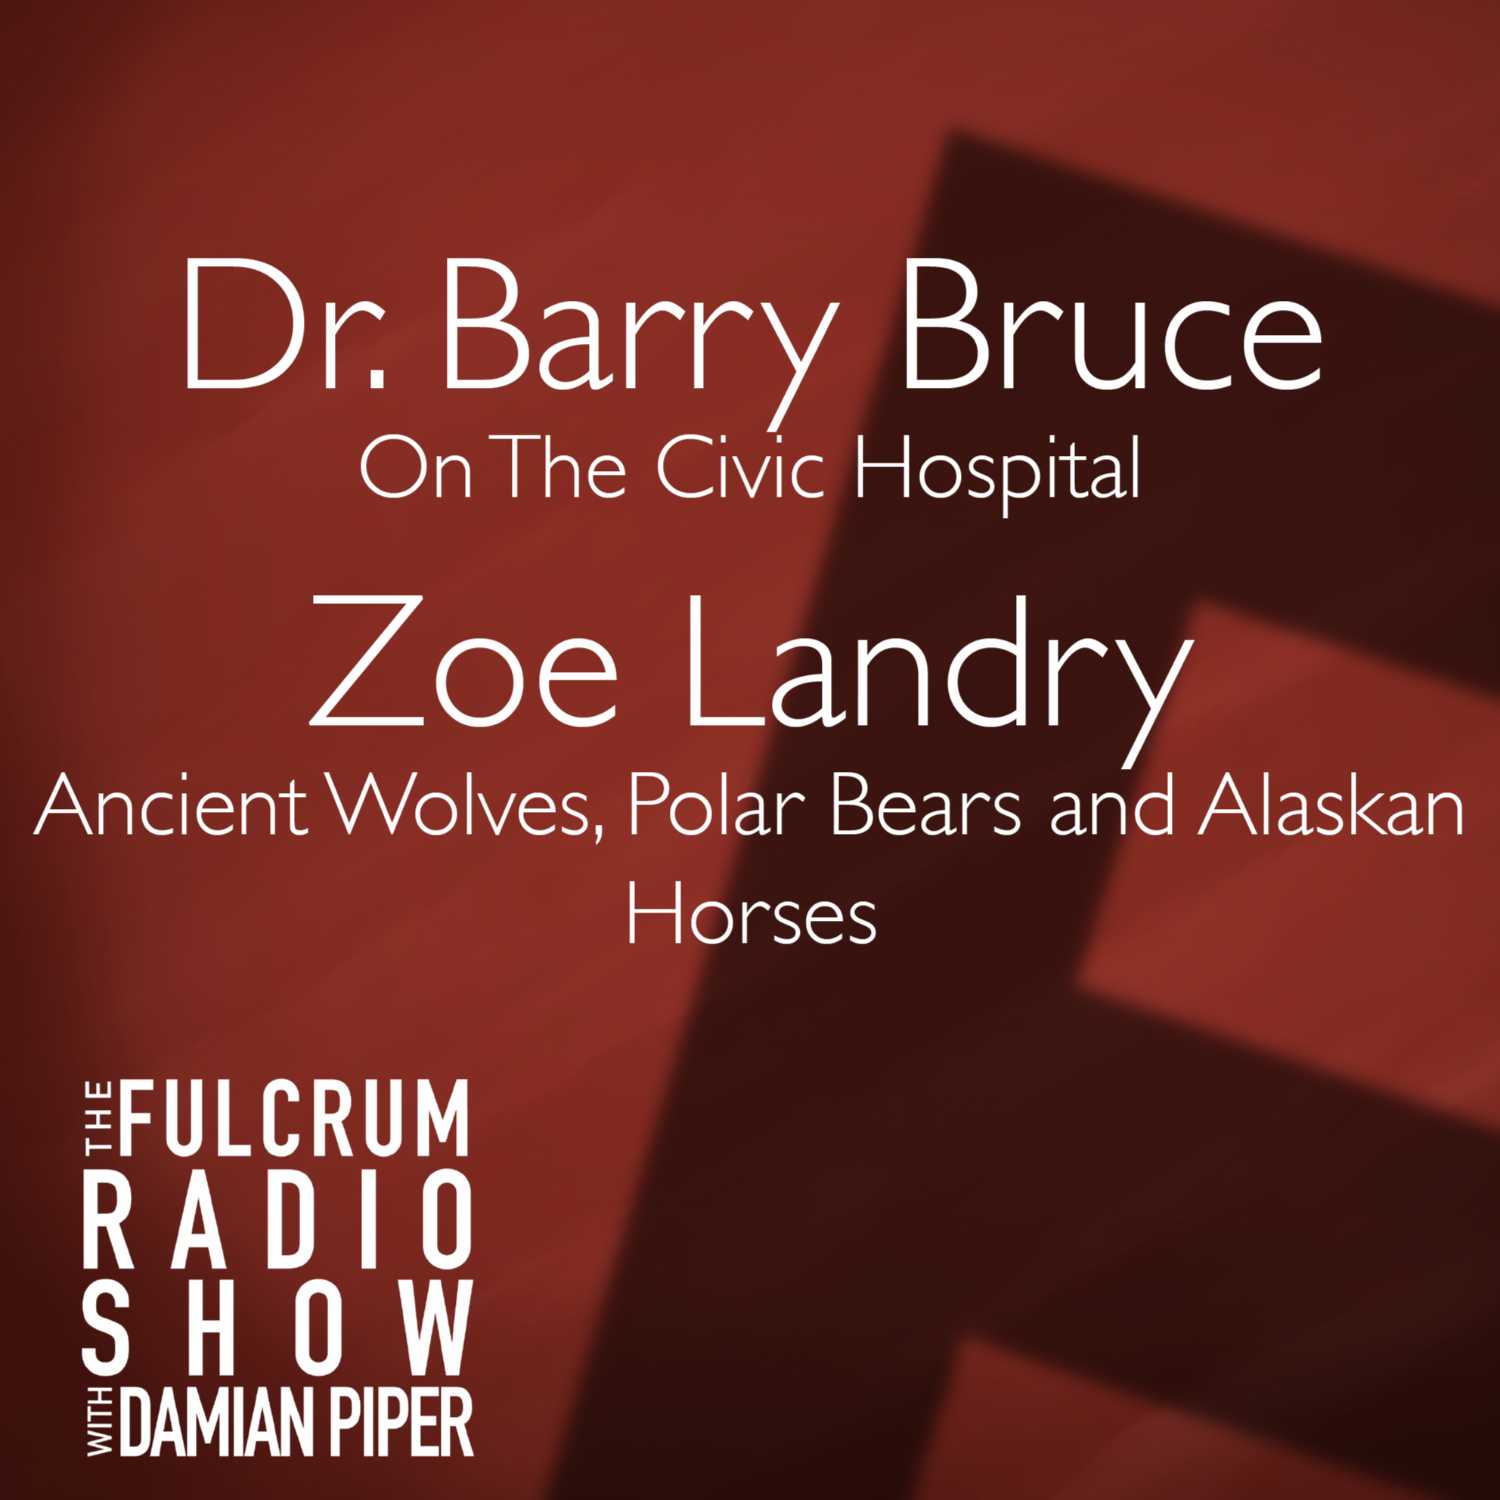 Episode 13: Dr. Barry Bruce on the new Civic Hospital, Zoe Landry on Ancient Wolves